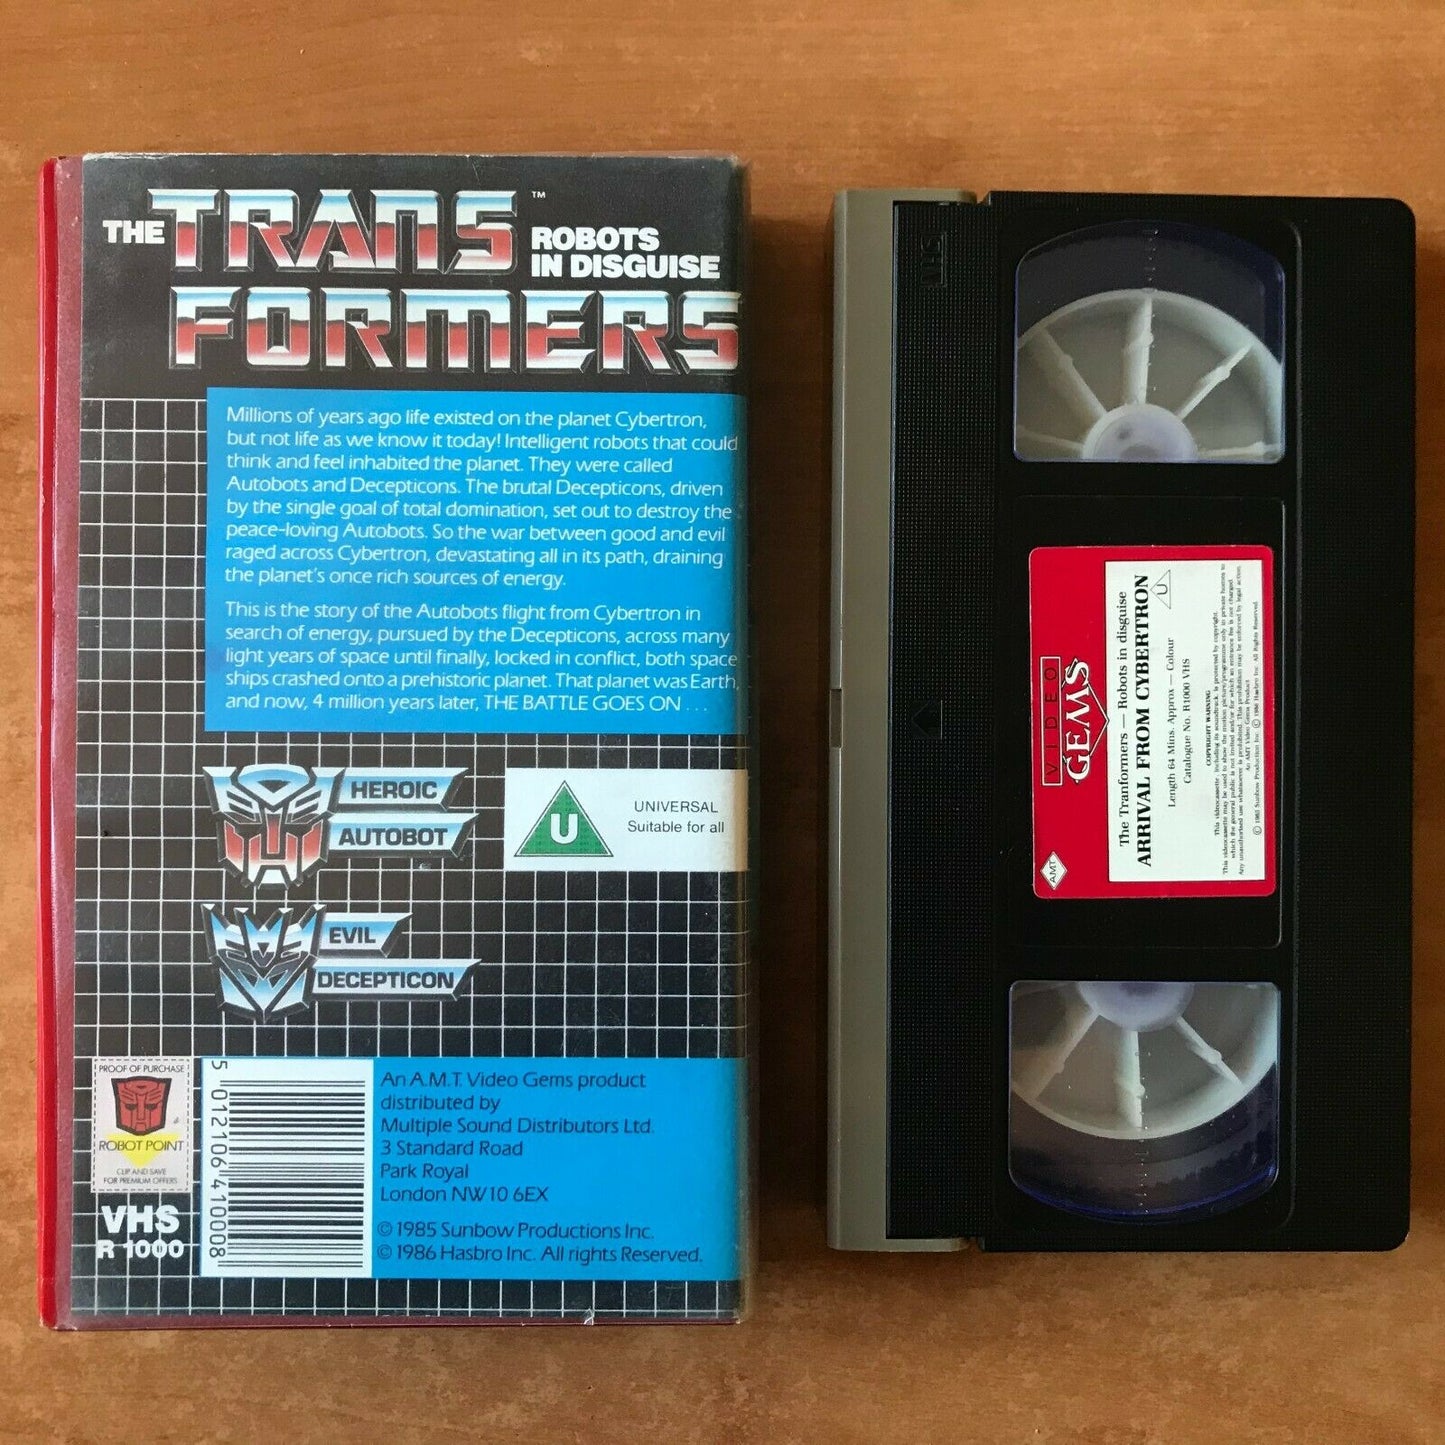 The Transformers: Arrival From Cybertron - Animated Action - Children's - VHS-